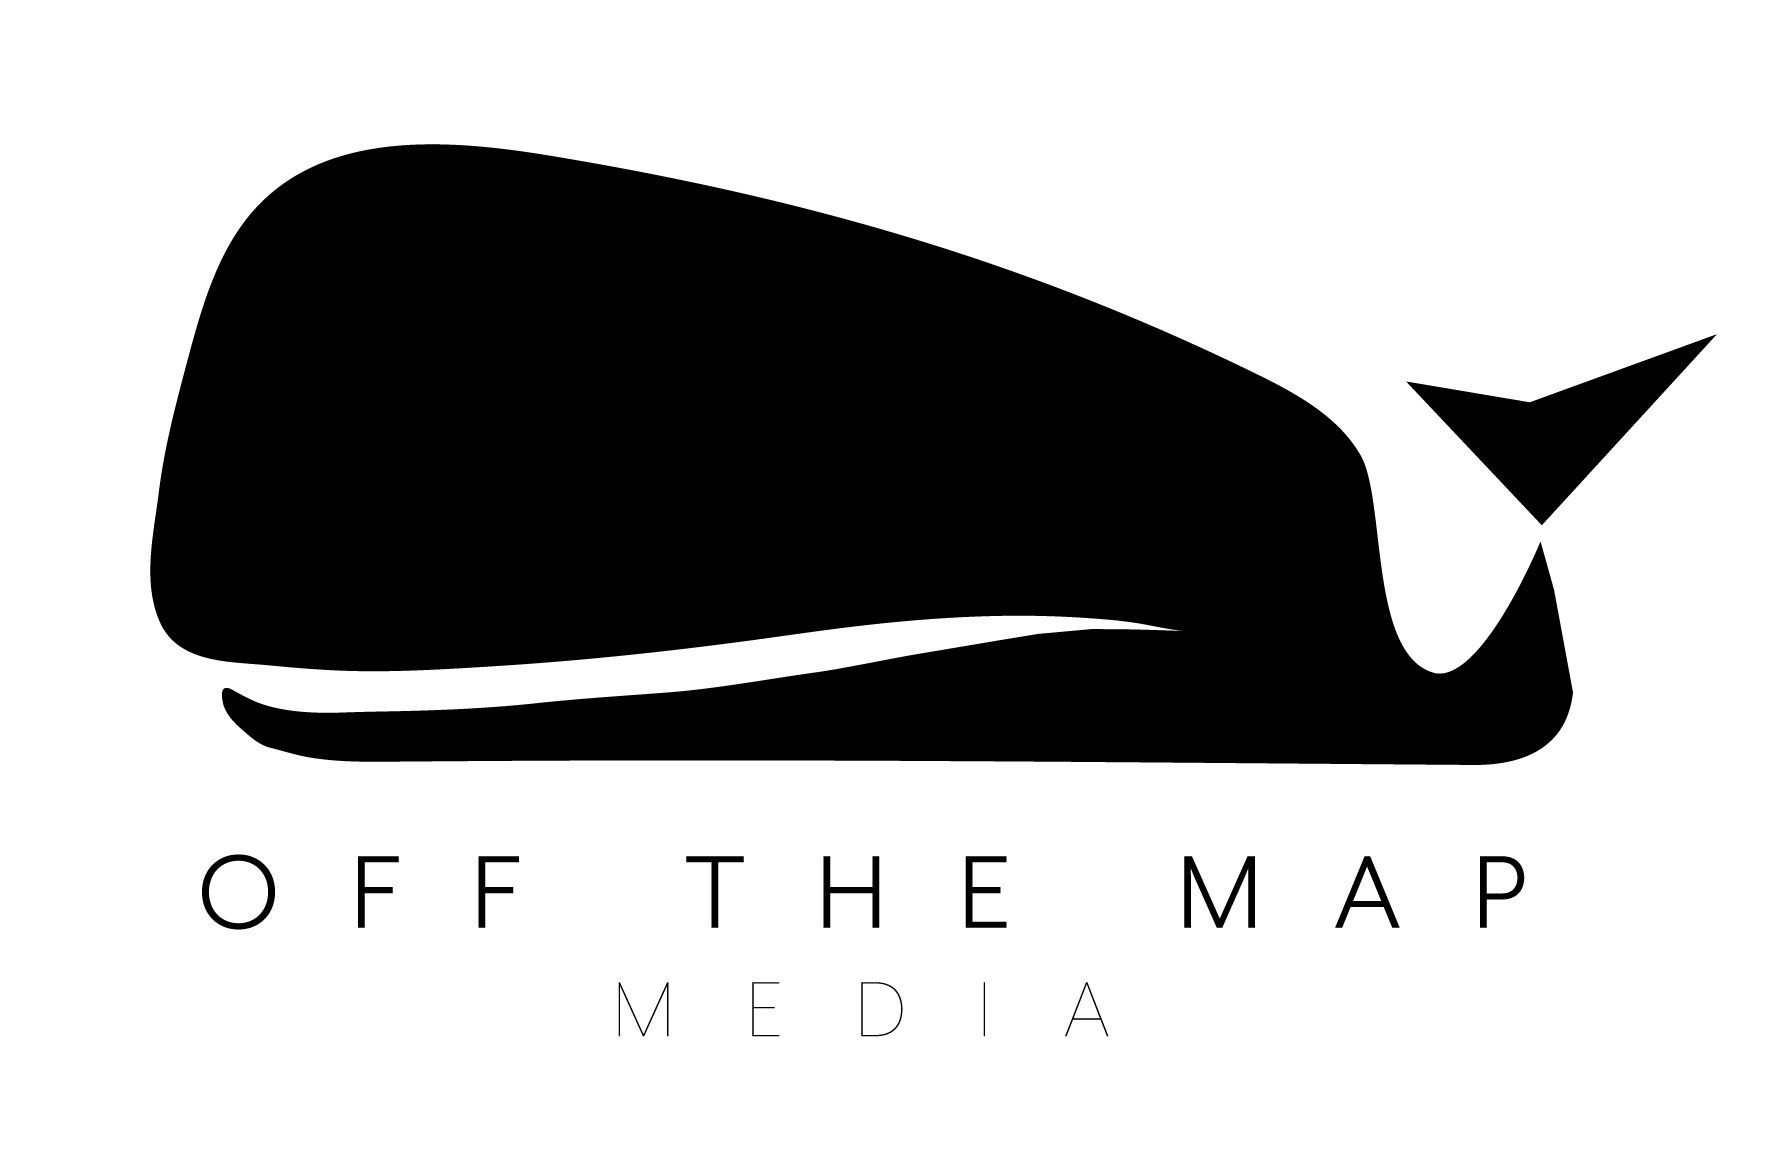 OFF THE MAP MEDIA